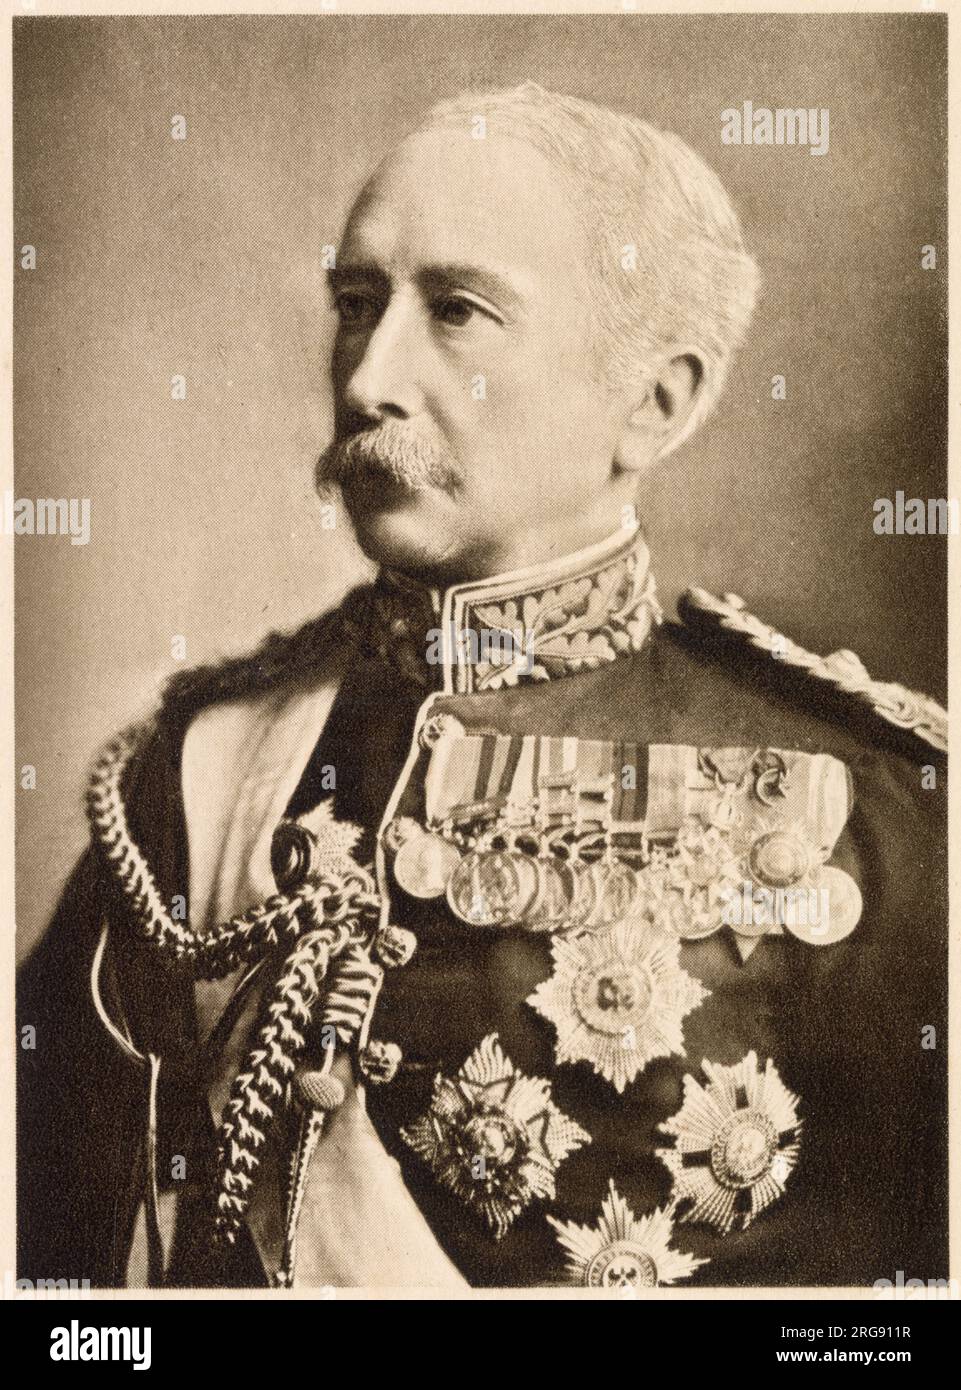 Field Marshal Garnet Joseph Wolseley, 1st Viscount Wolseley (1833 - 1913), early successes in India and Africa were followed by appalling incompetence during the Boer War. Photograph taken when Wolseley was retiring from being Commander-in-Chief of the British Army. Stock Photo